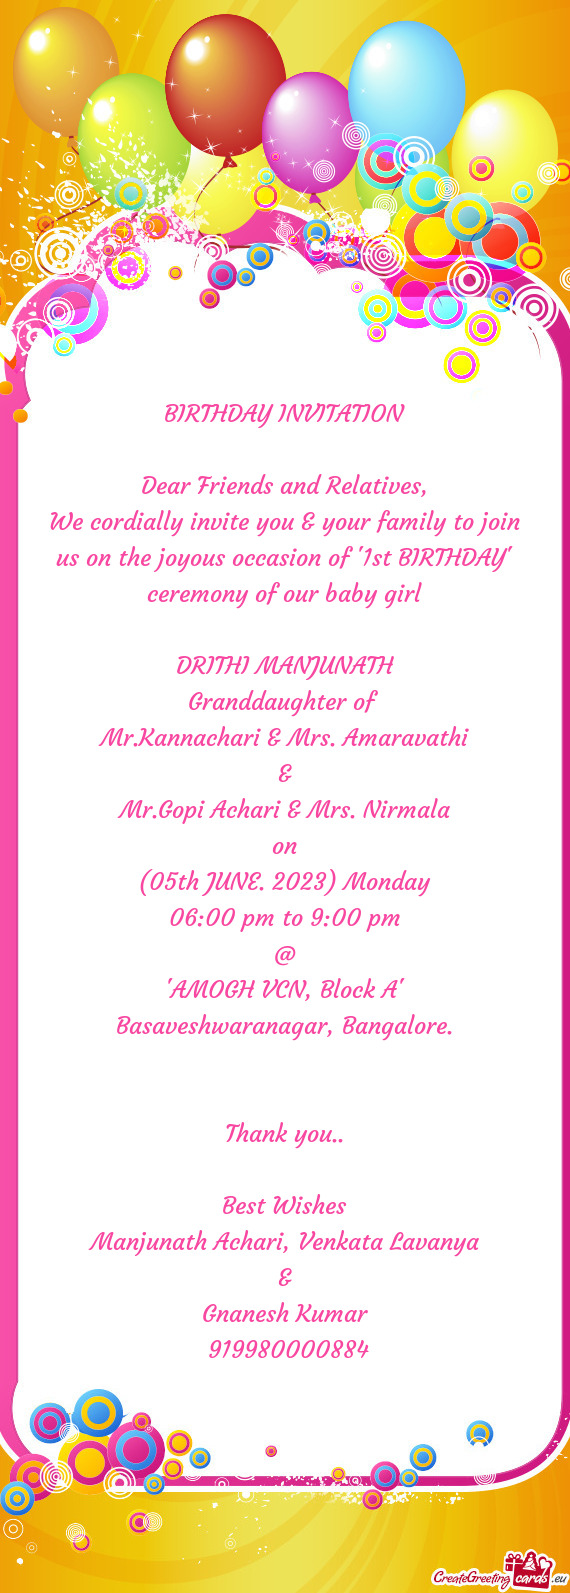 We cordially invite you & your family to join us on the joyous occasion of "1st BIRTHDAY" ceremony o